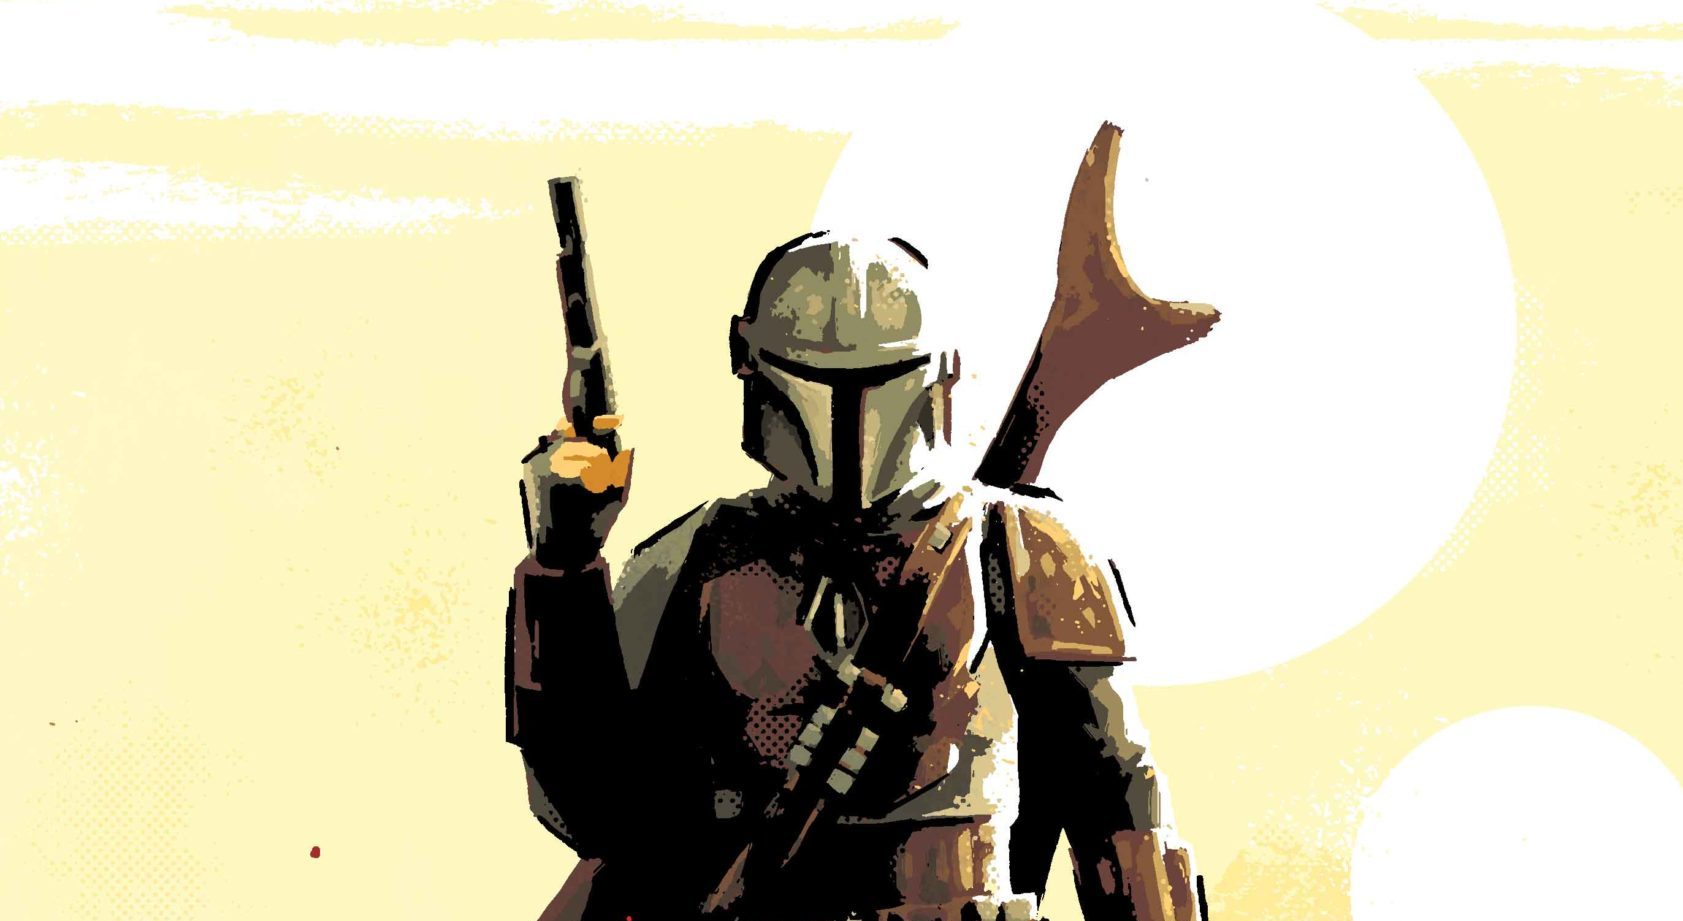 Didn’t Get Enough From Disney+? Star Wars: The Mandalorian Comes To Marvel Comics